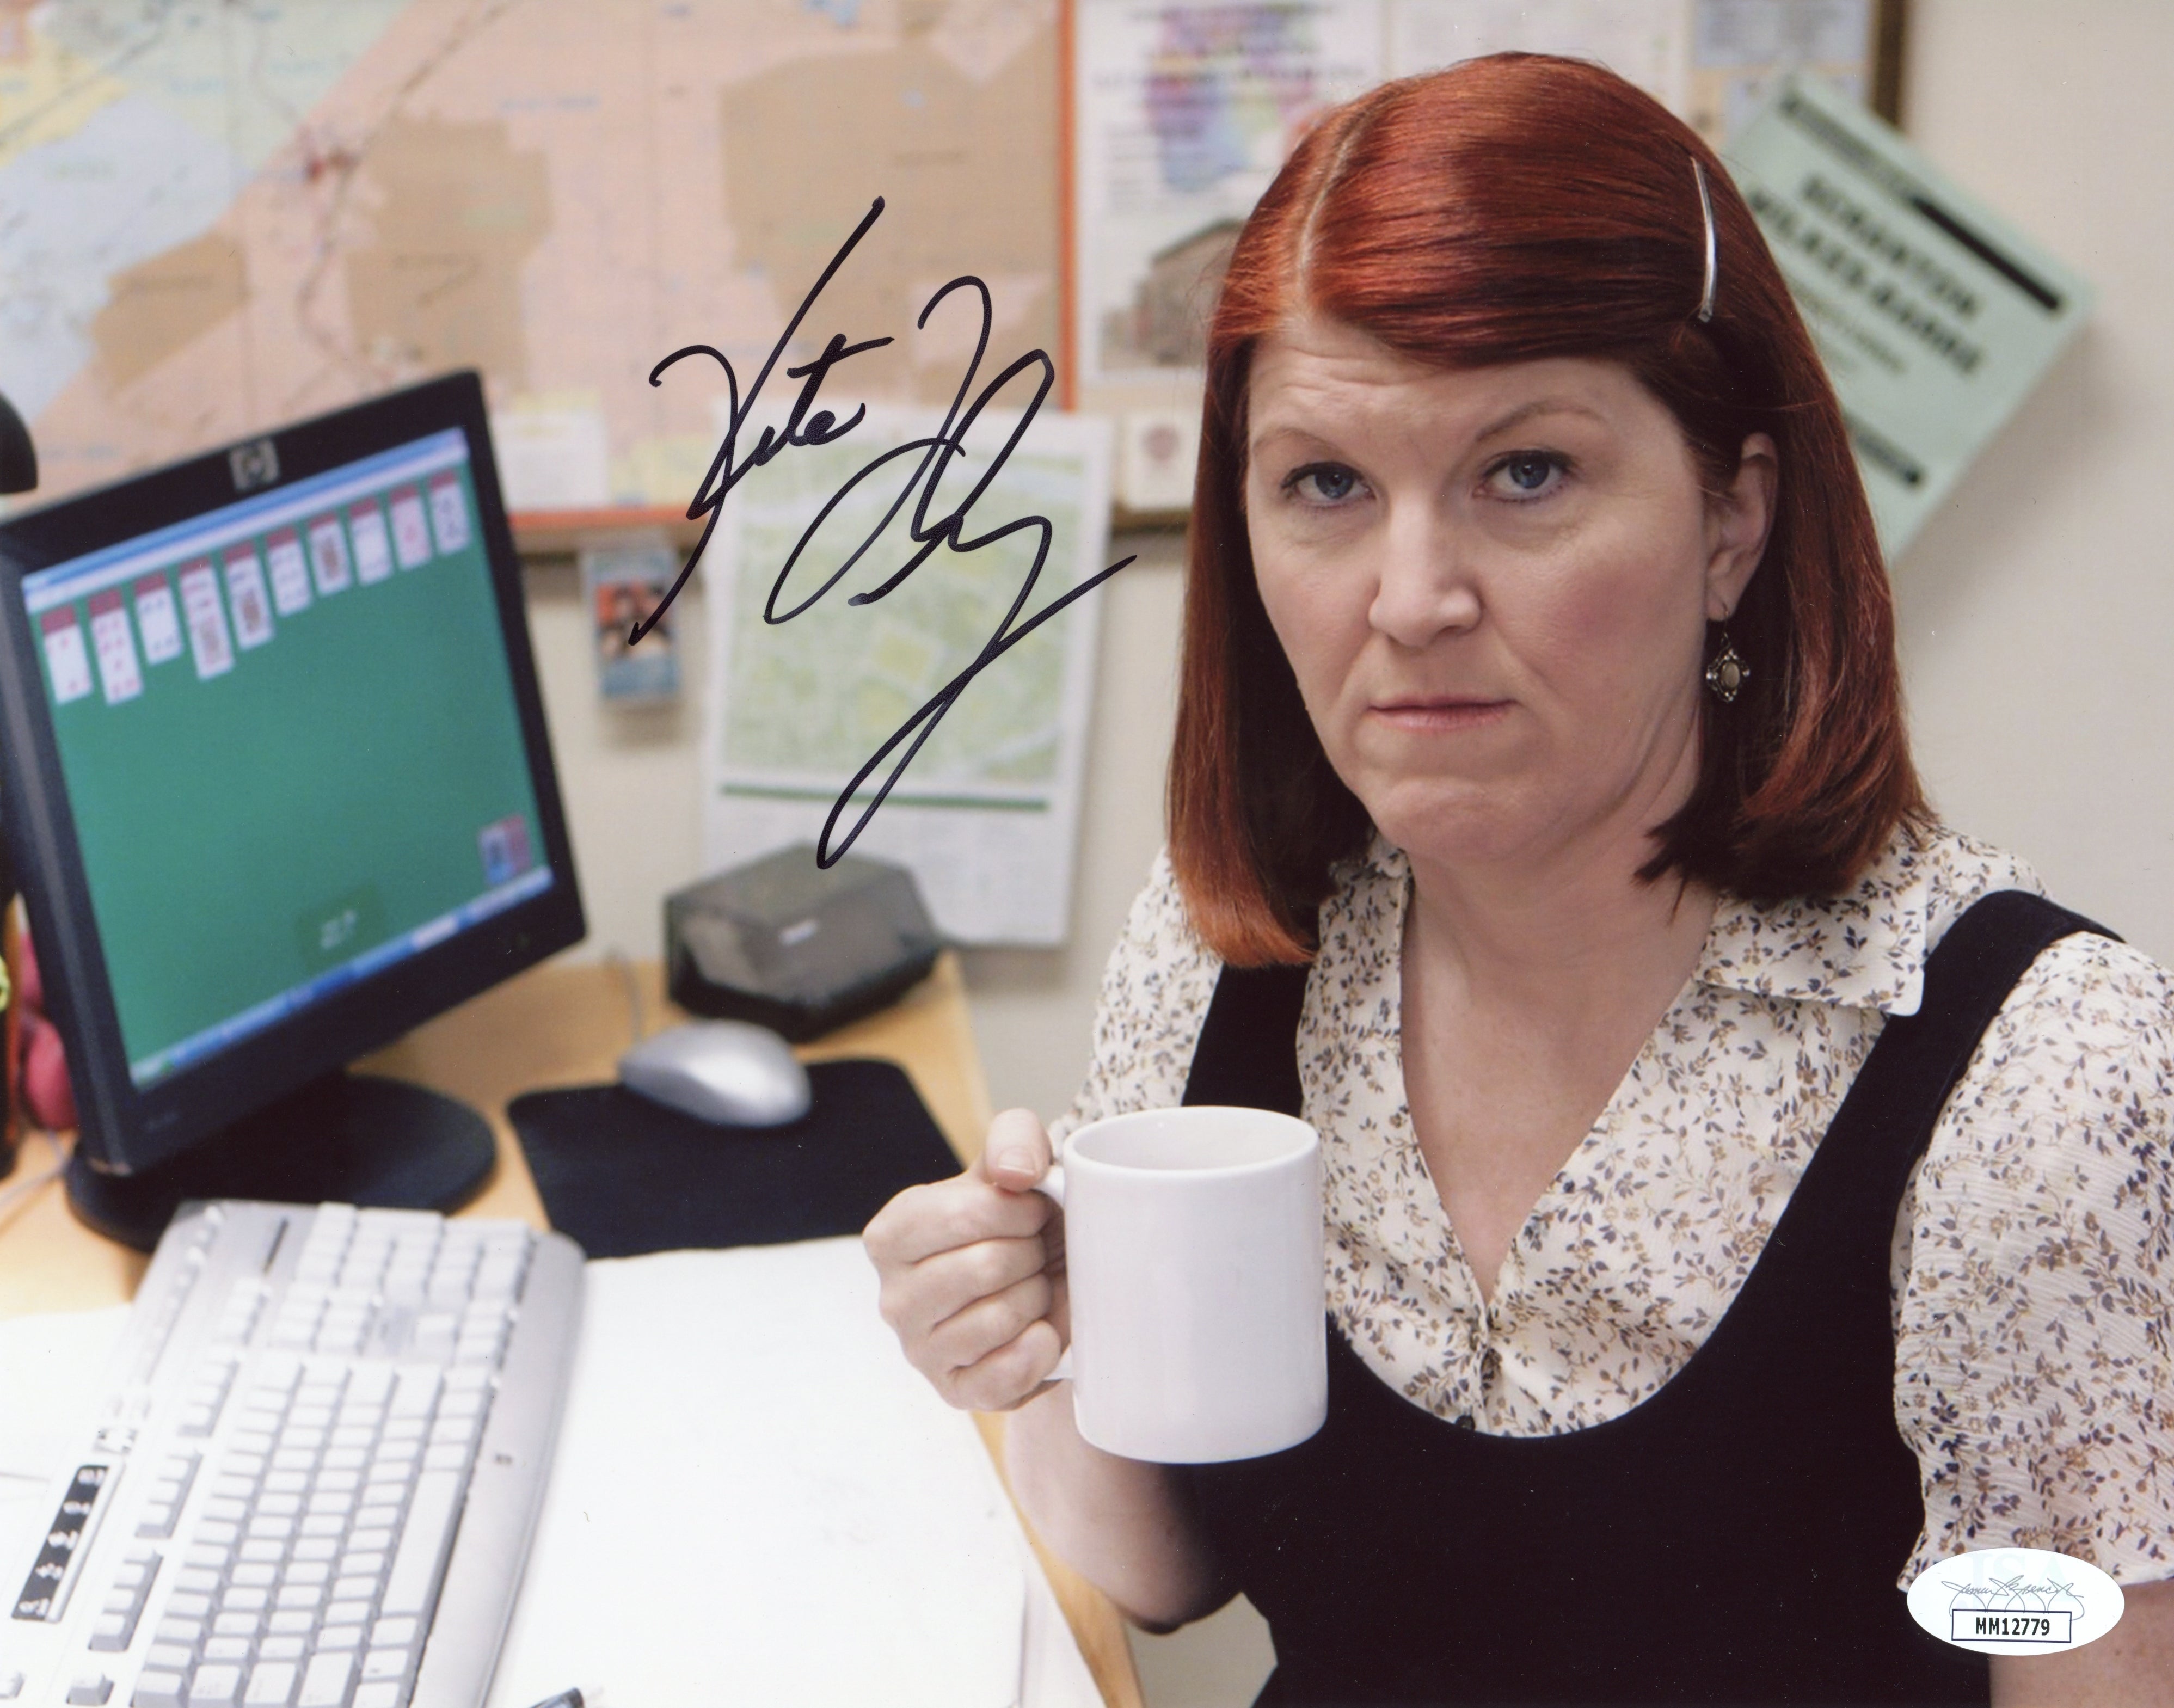 Kate Flannery The Office 8x10 Photo Signed Autograph JSA Certified COA Auto